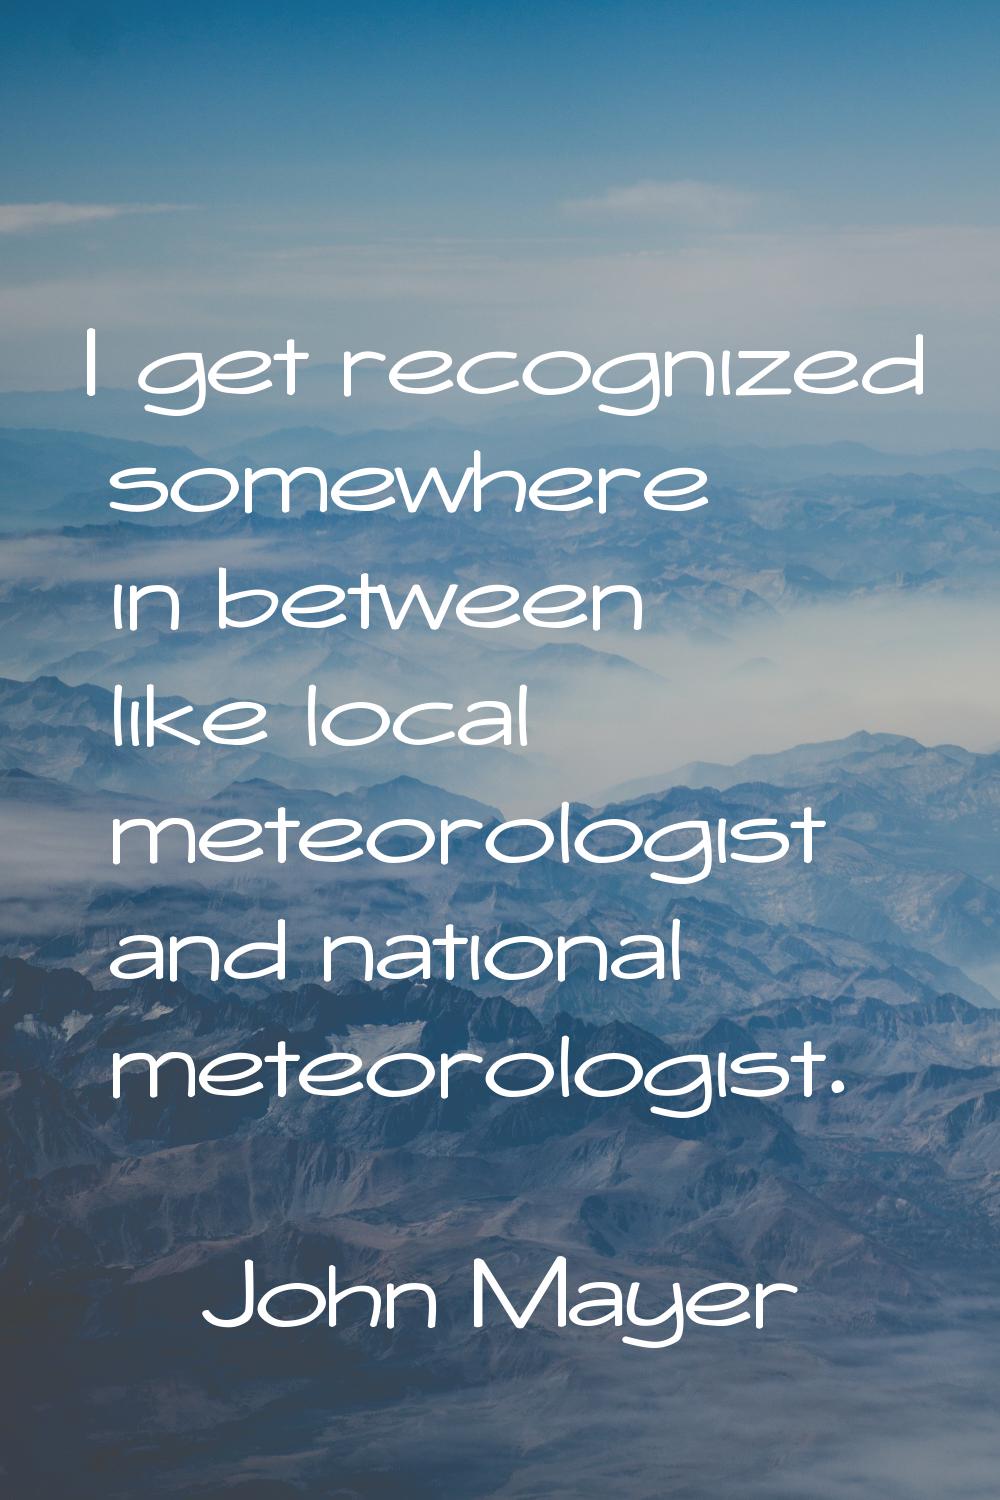 I get recognized somewhere in between like local meteorologist and national meteorologist.